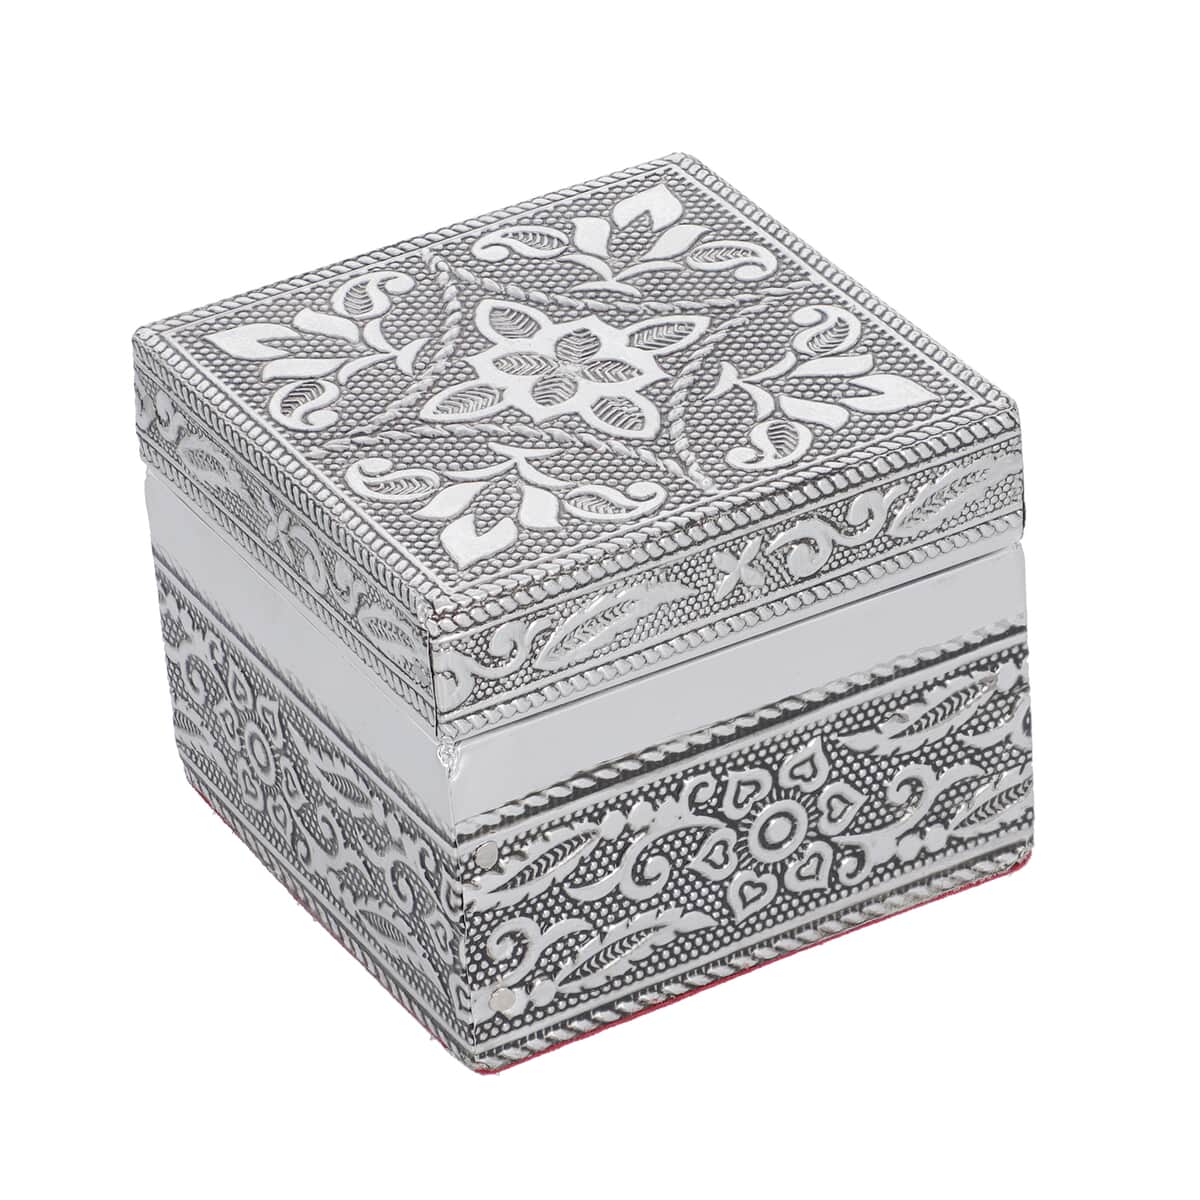 Set of 3 Handcrafted Mandala Embossed Aluminum Oxidized Multi-Purpose Nested Box with Scratch Protection Interior (4.75x4.75x2.5, 3.5x3.5x2.15, 2.5x2.5x1 in) image number 6